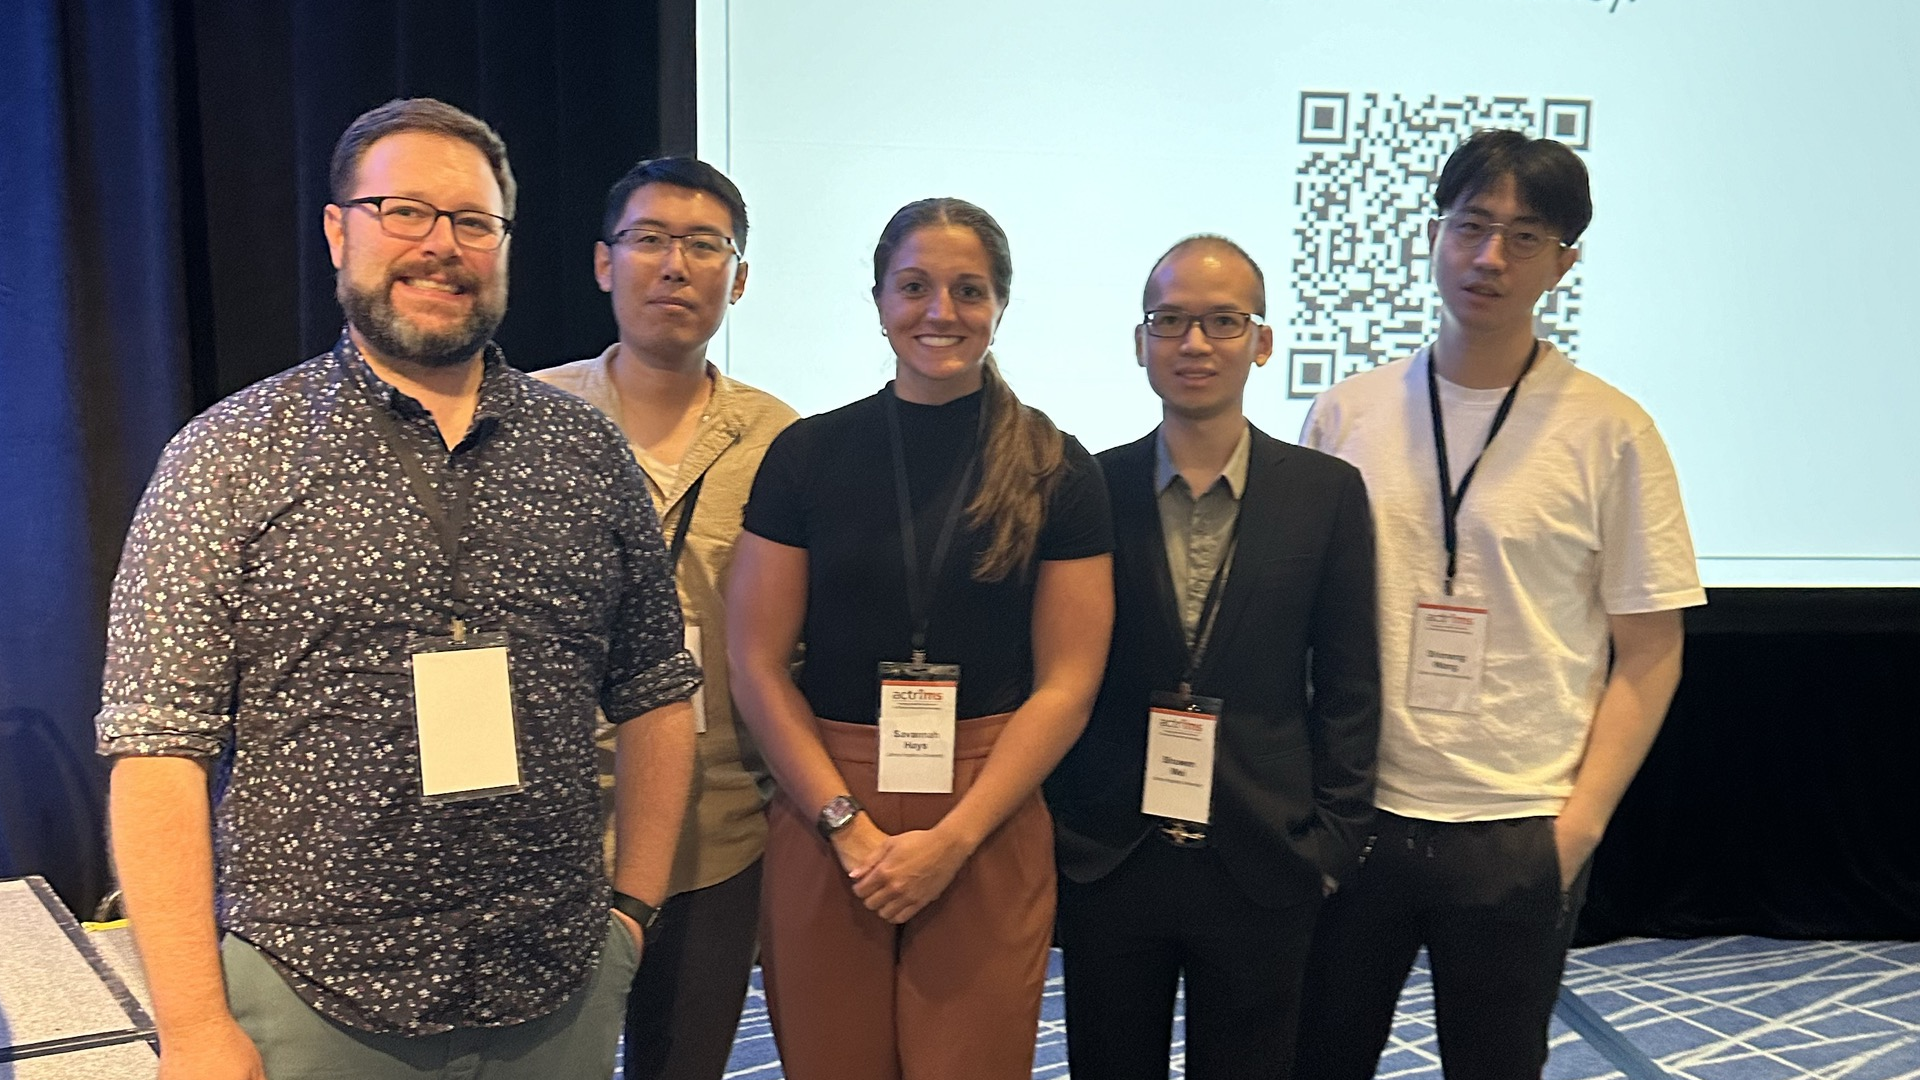 IACL at the ACTRIMS Young Scientist Meeting. From left to right, Dr. Blake Dewey, Dr. Jinwei Zhang, Savannah Hays, Dr. Shuwen Wei, & Shimeng Wang.